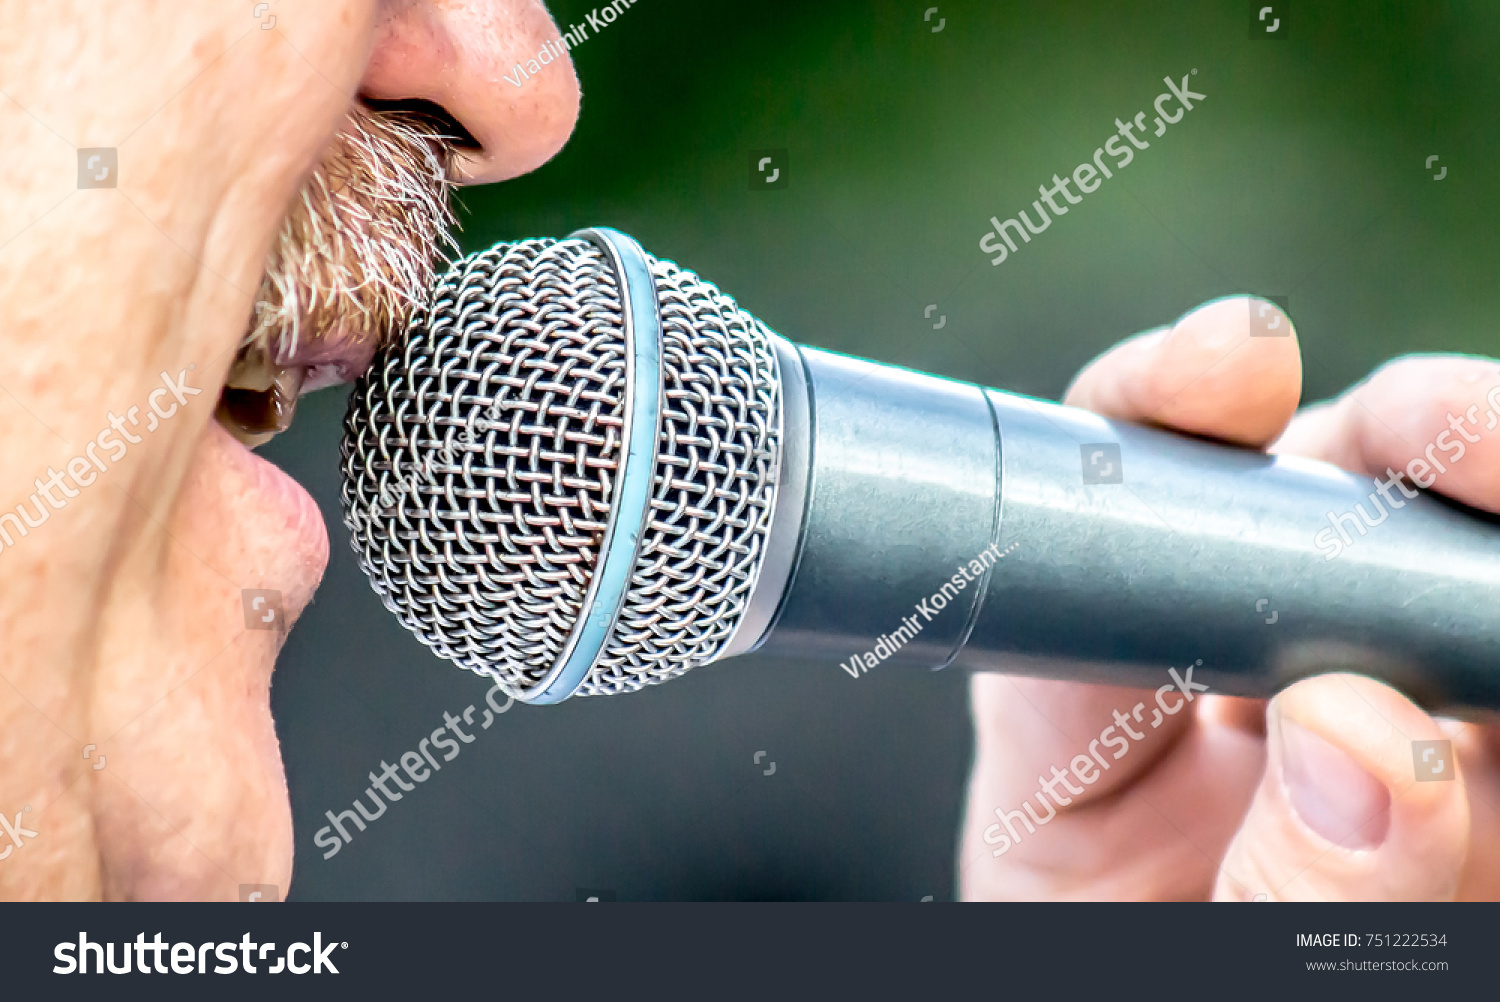 A man sings into a microphone #751222534